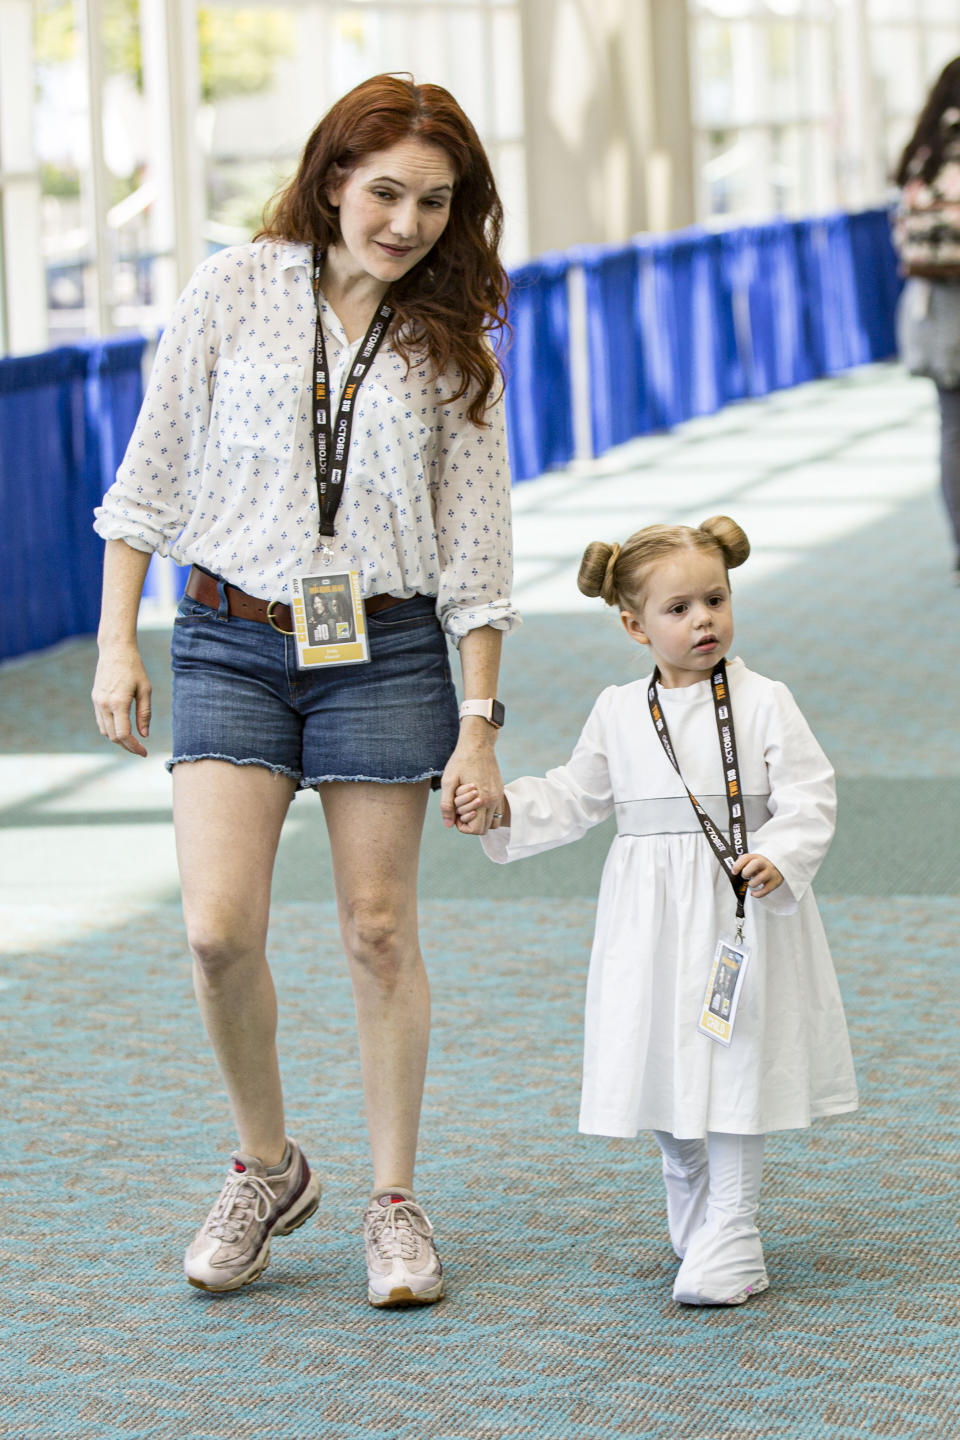 A young girl dressed as Princess Leia from "Star Wars."